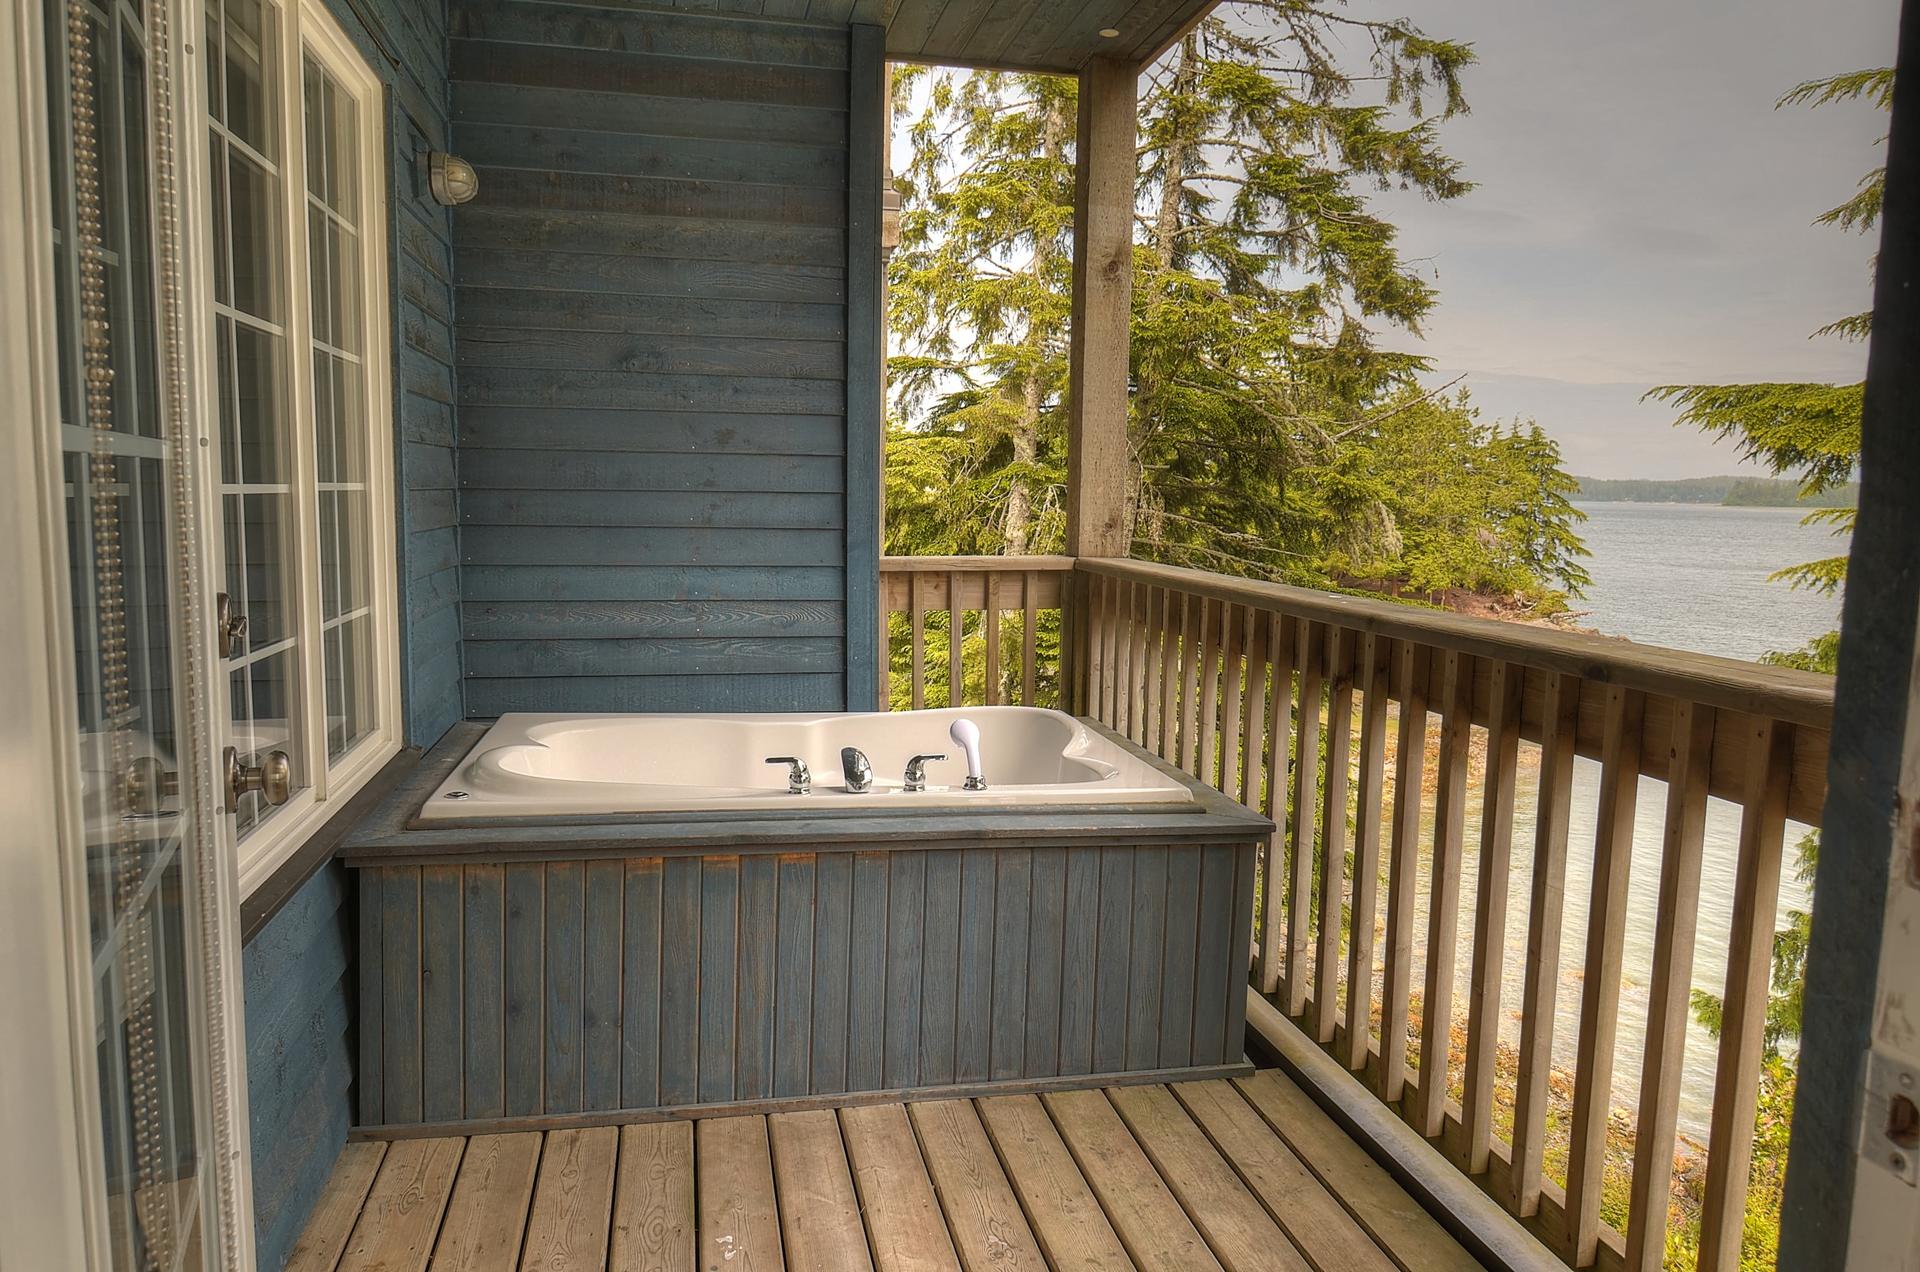 All suites with tubs have beautiful water views.